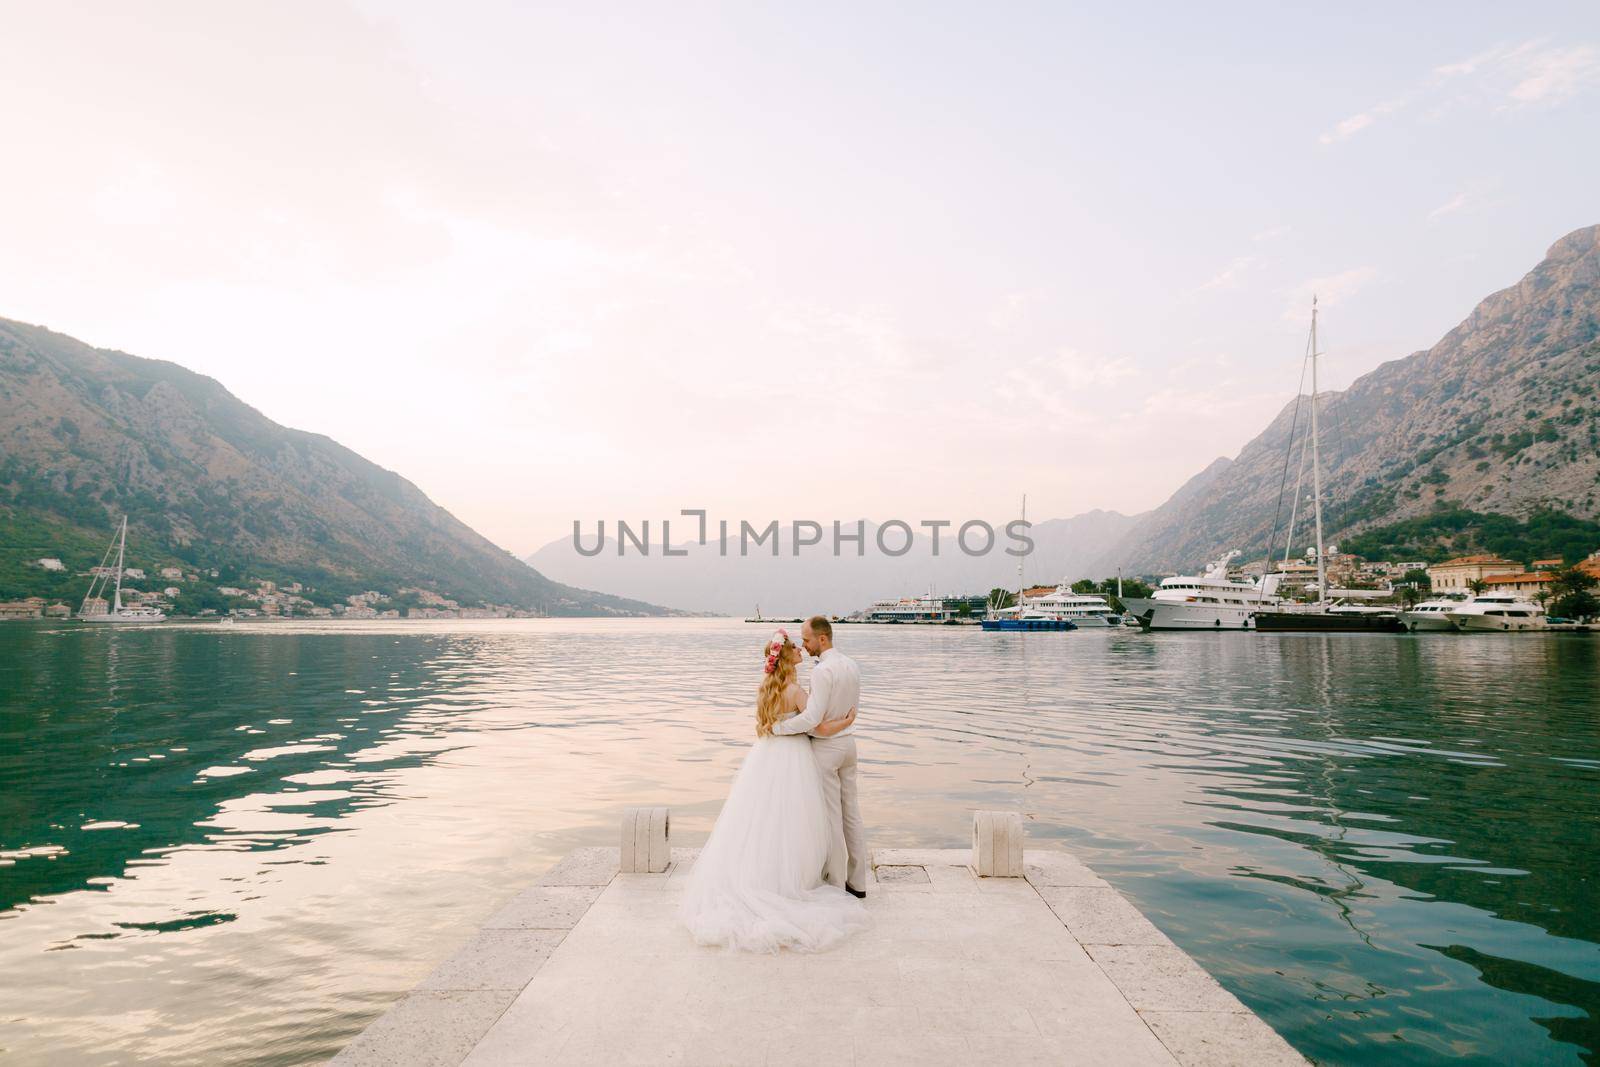 The bride in a wreath and groom hug on the pier near the old town of Kotor in the Bay of Kotor . High quality photo